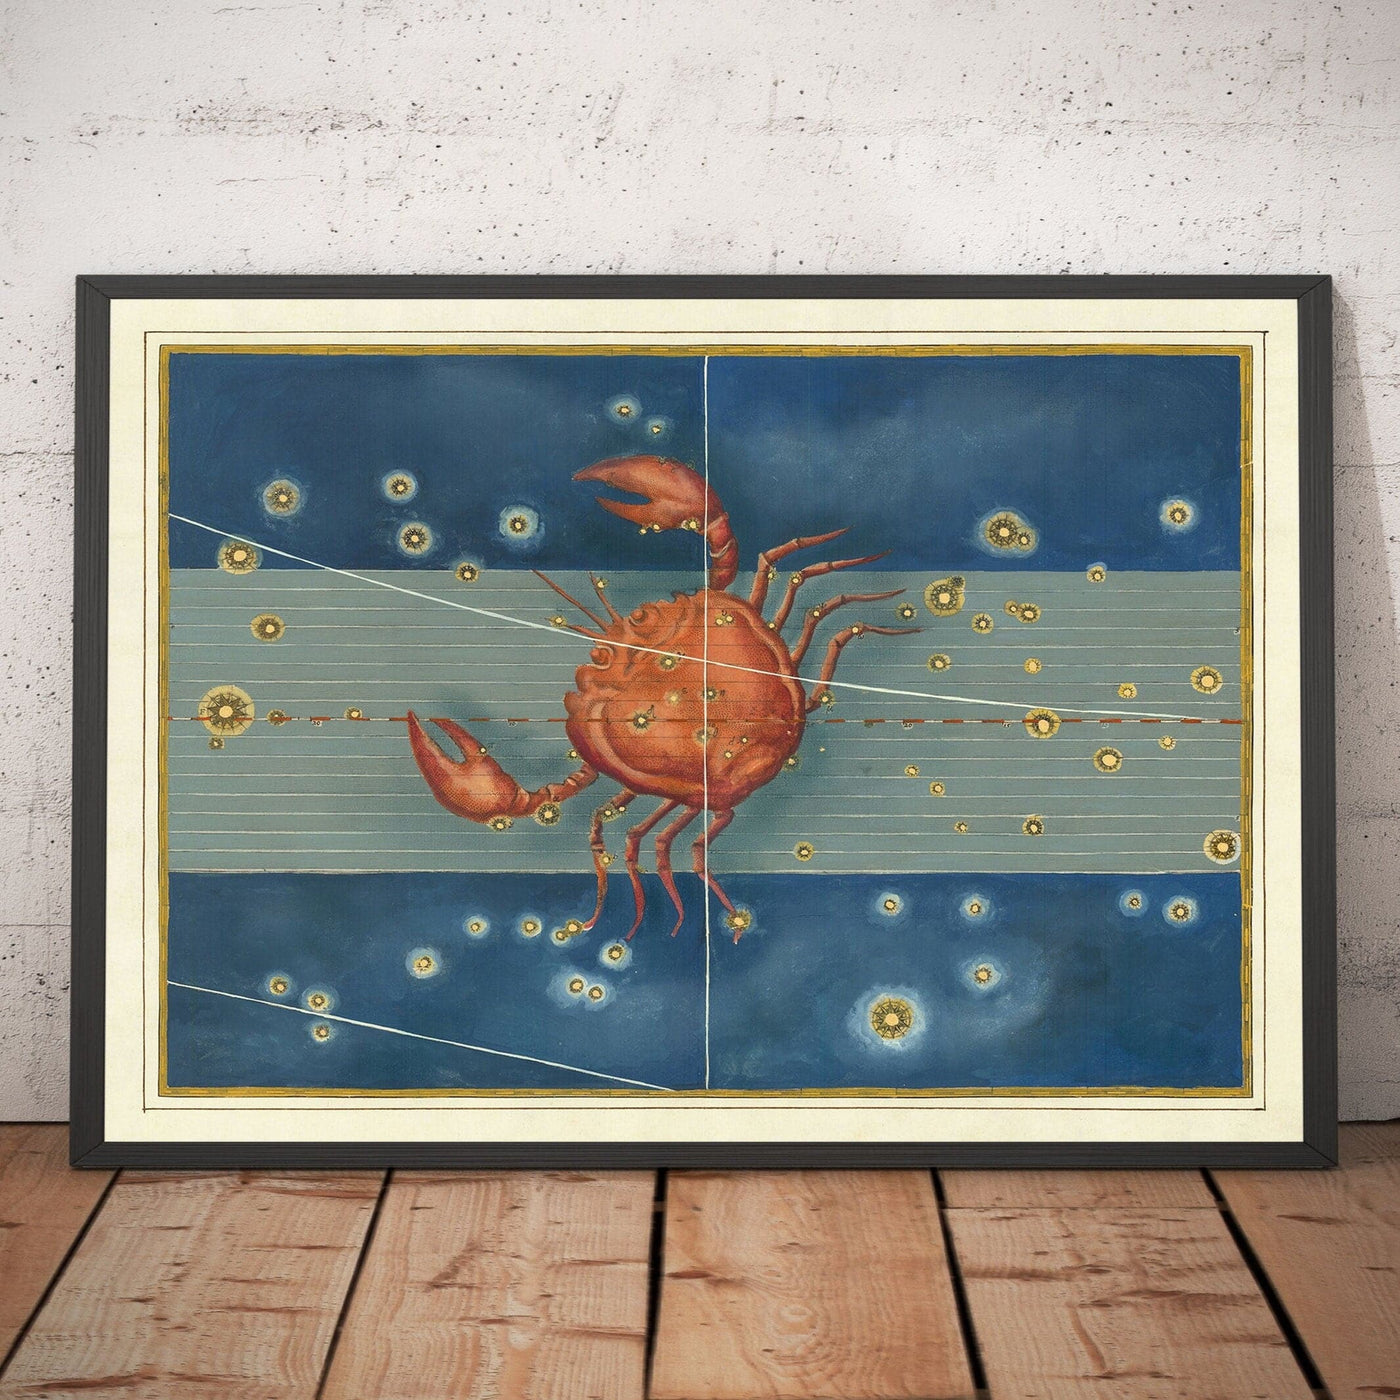 Old Star Map of Cancer, 1603 by Johann Bayer - Zodiac Astrology Chart - The Crab Horoscope Sign